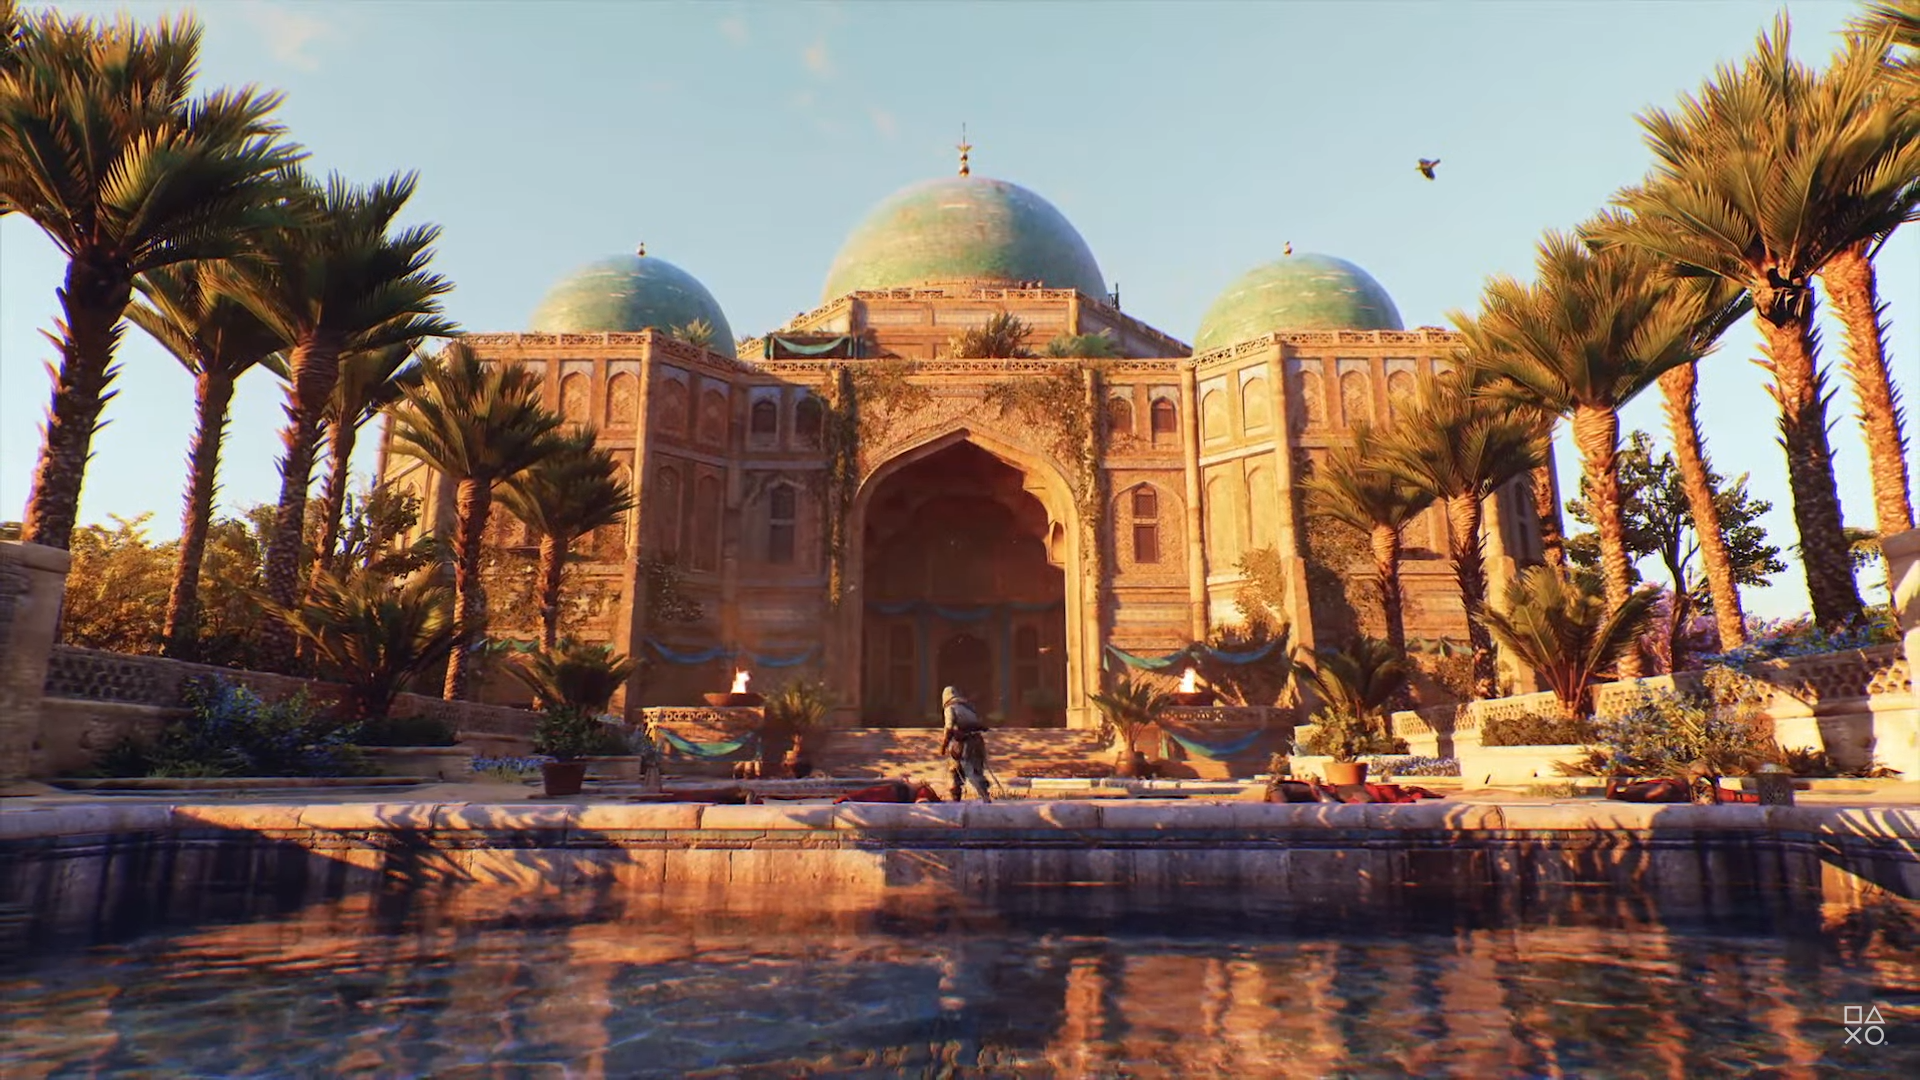 Assassin's Creed Mirage release date